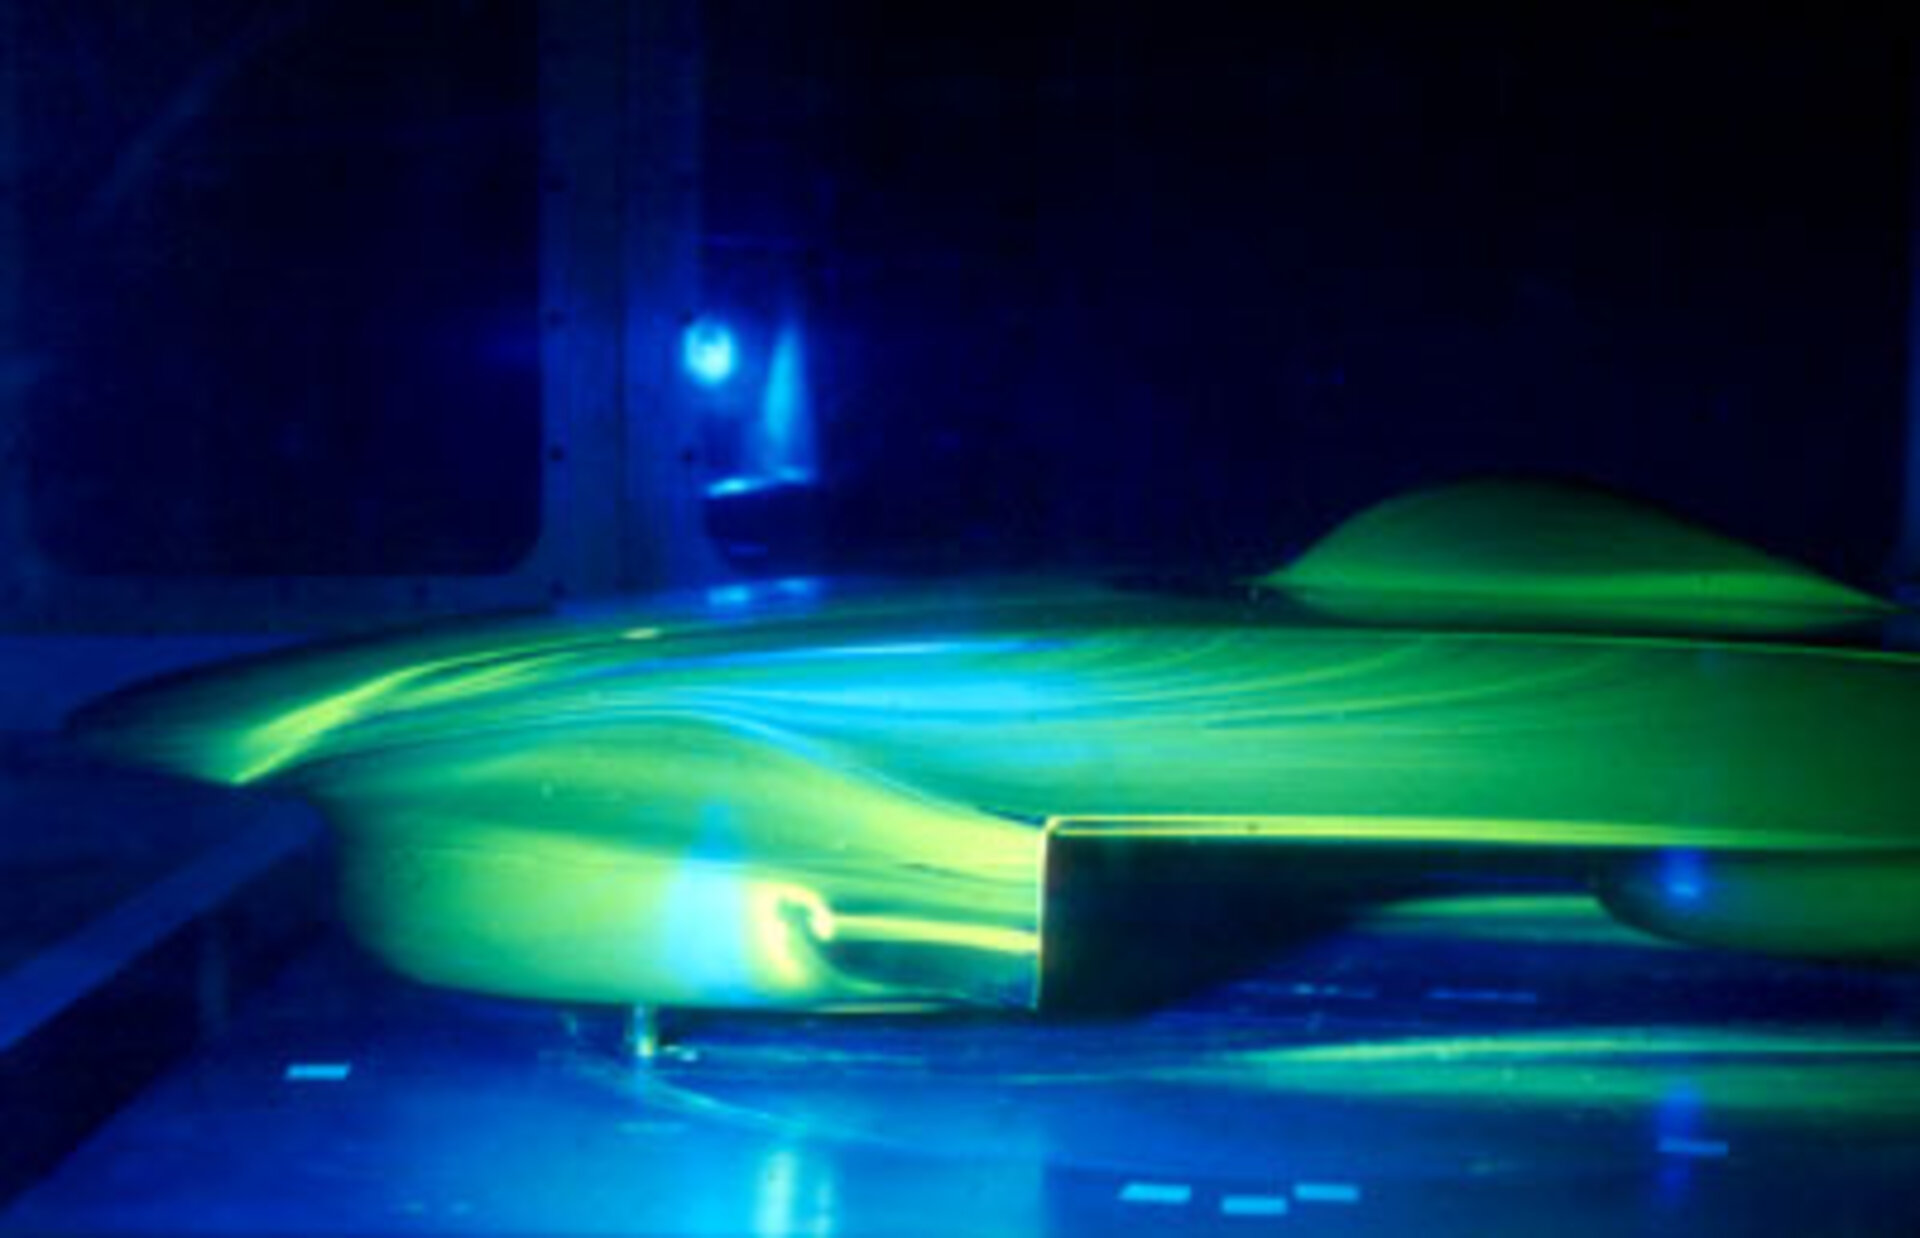 Wind tunnel tests performed on a scale model of the Nuna